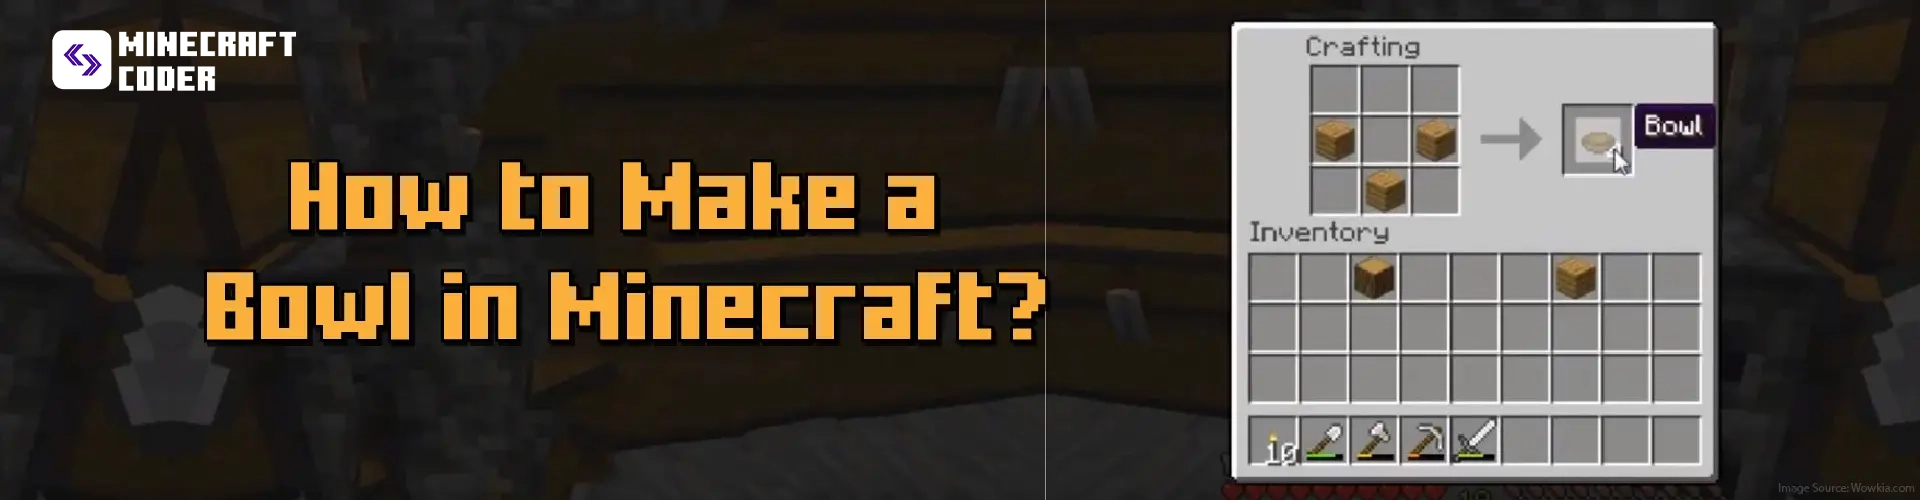 HOW TO MAKE A BOWL IN MINECRAFT